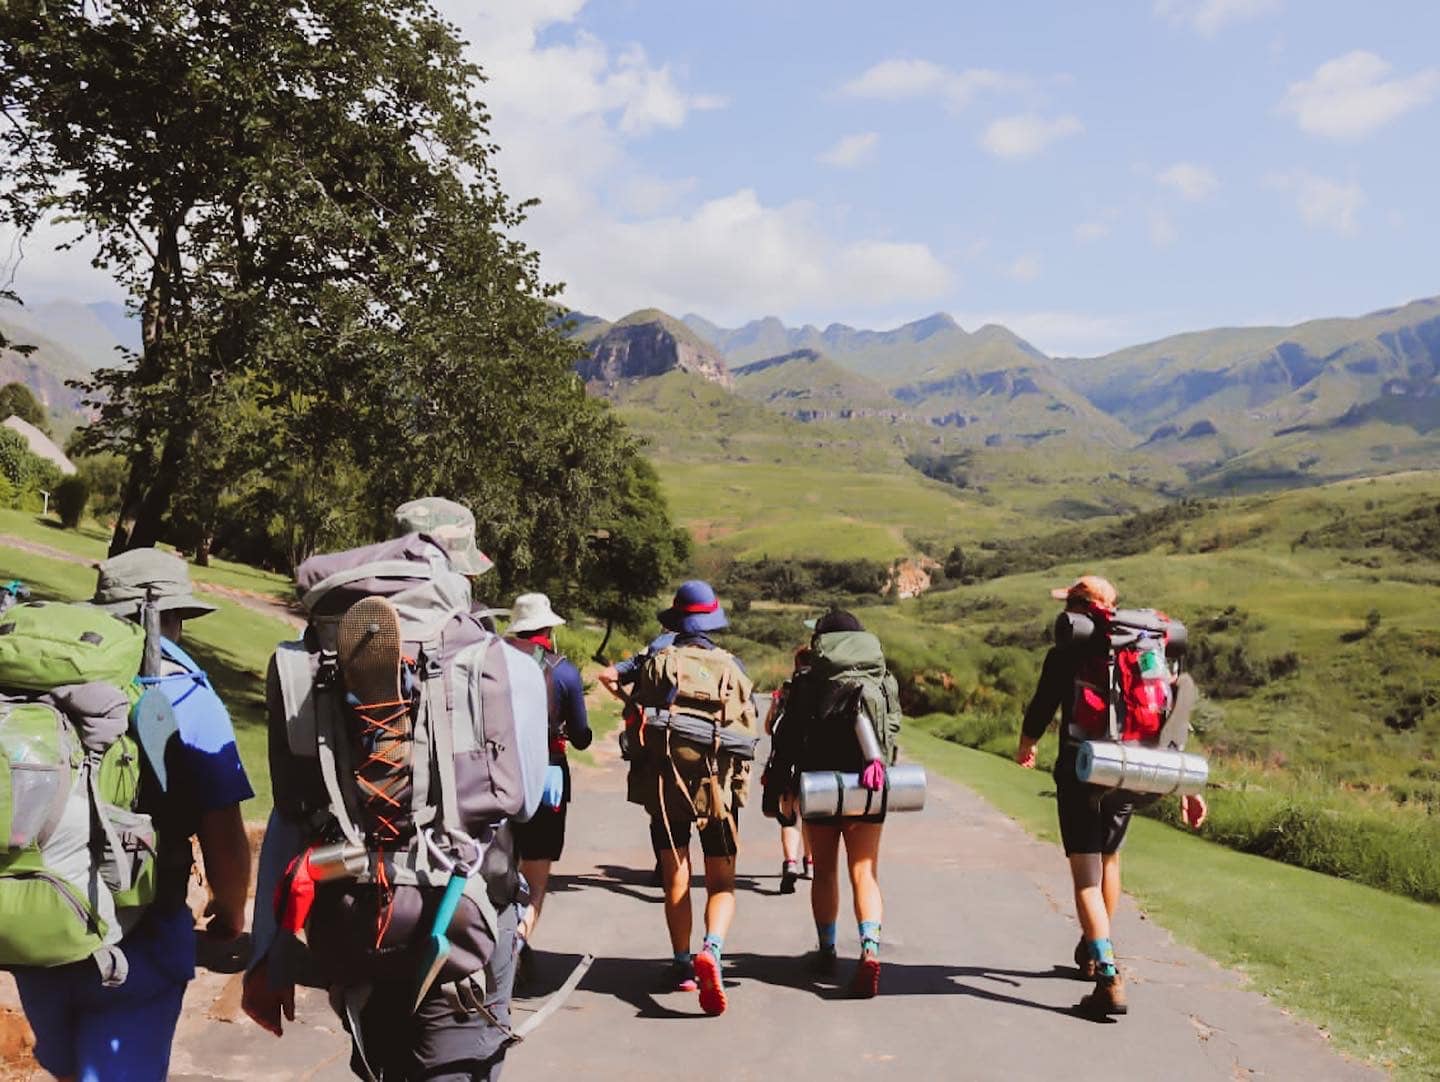 Hiking clubs are a great way to get into the outdoors with others